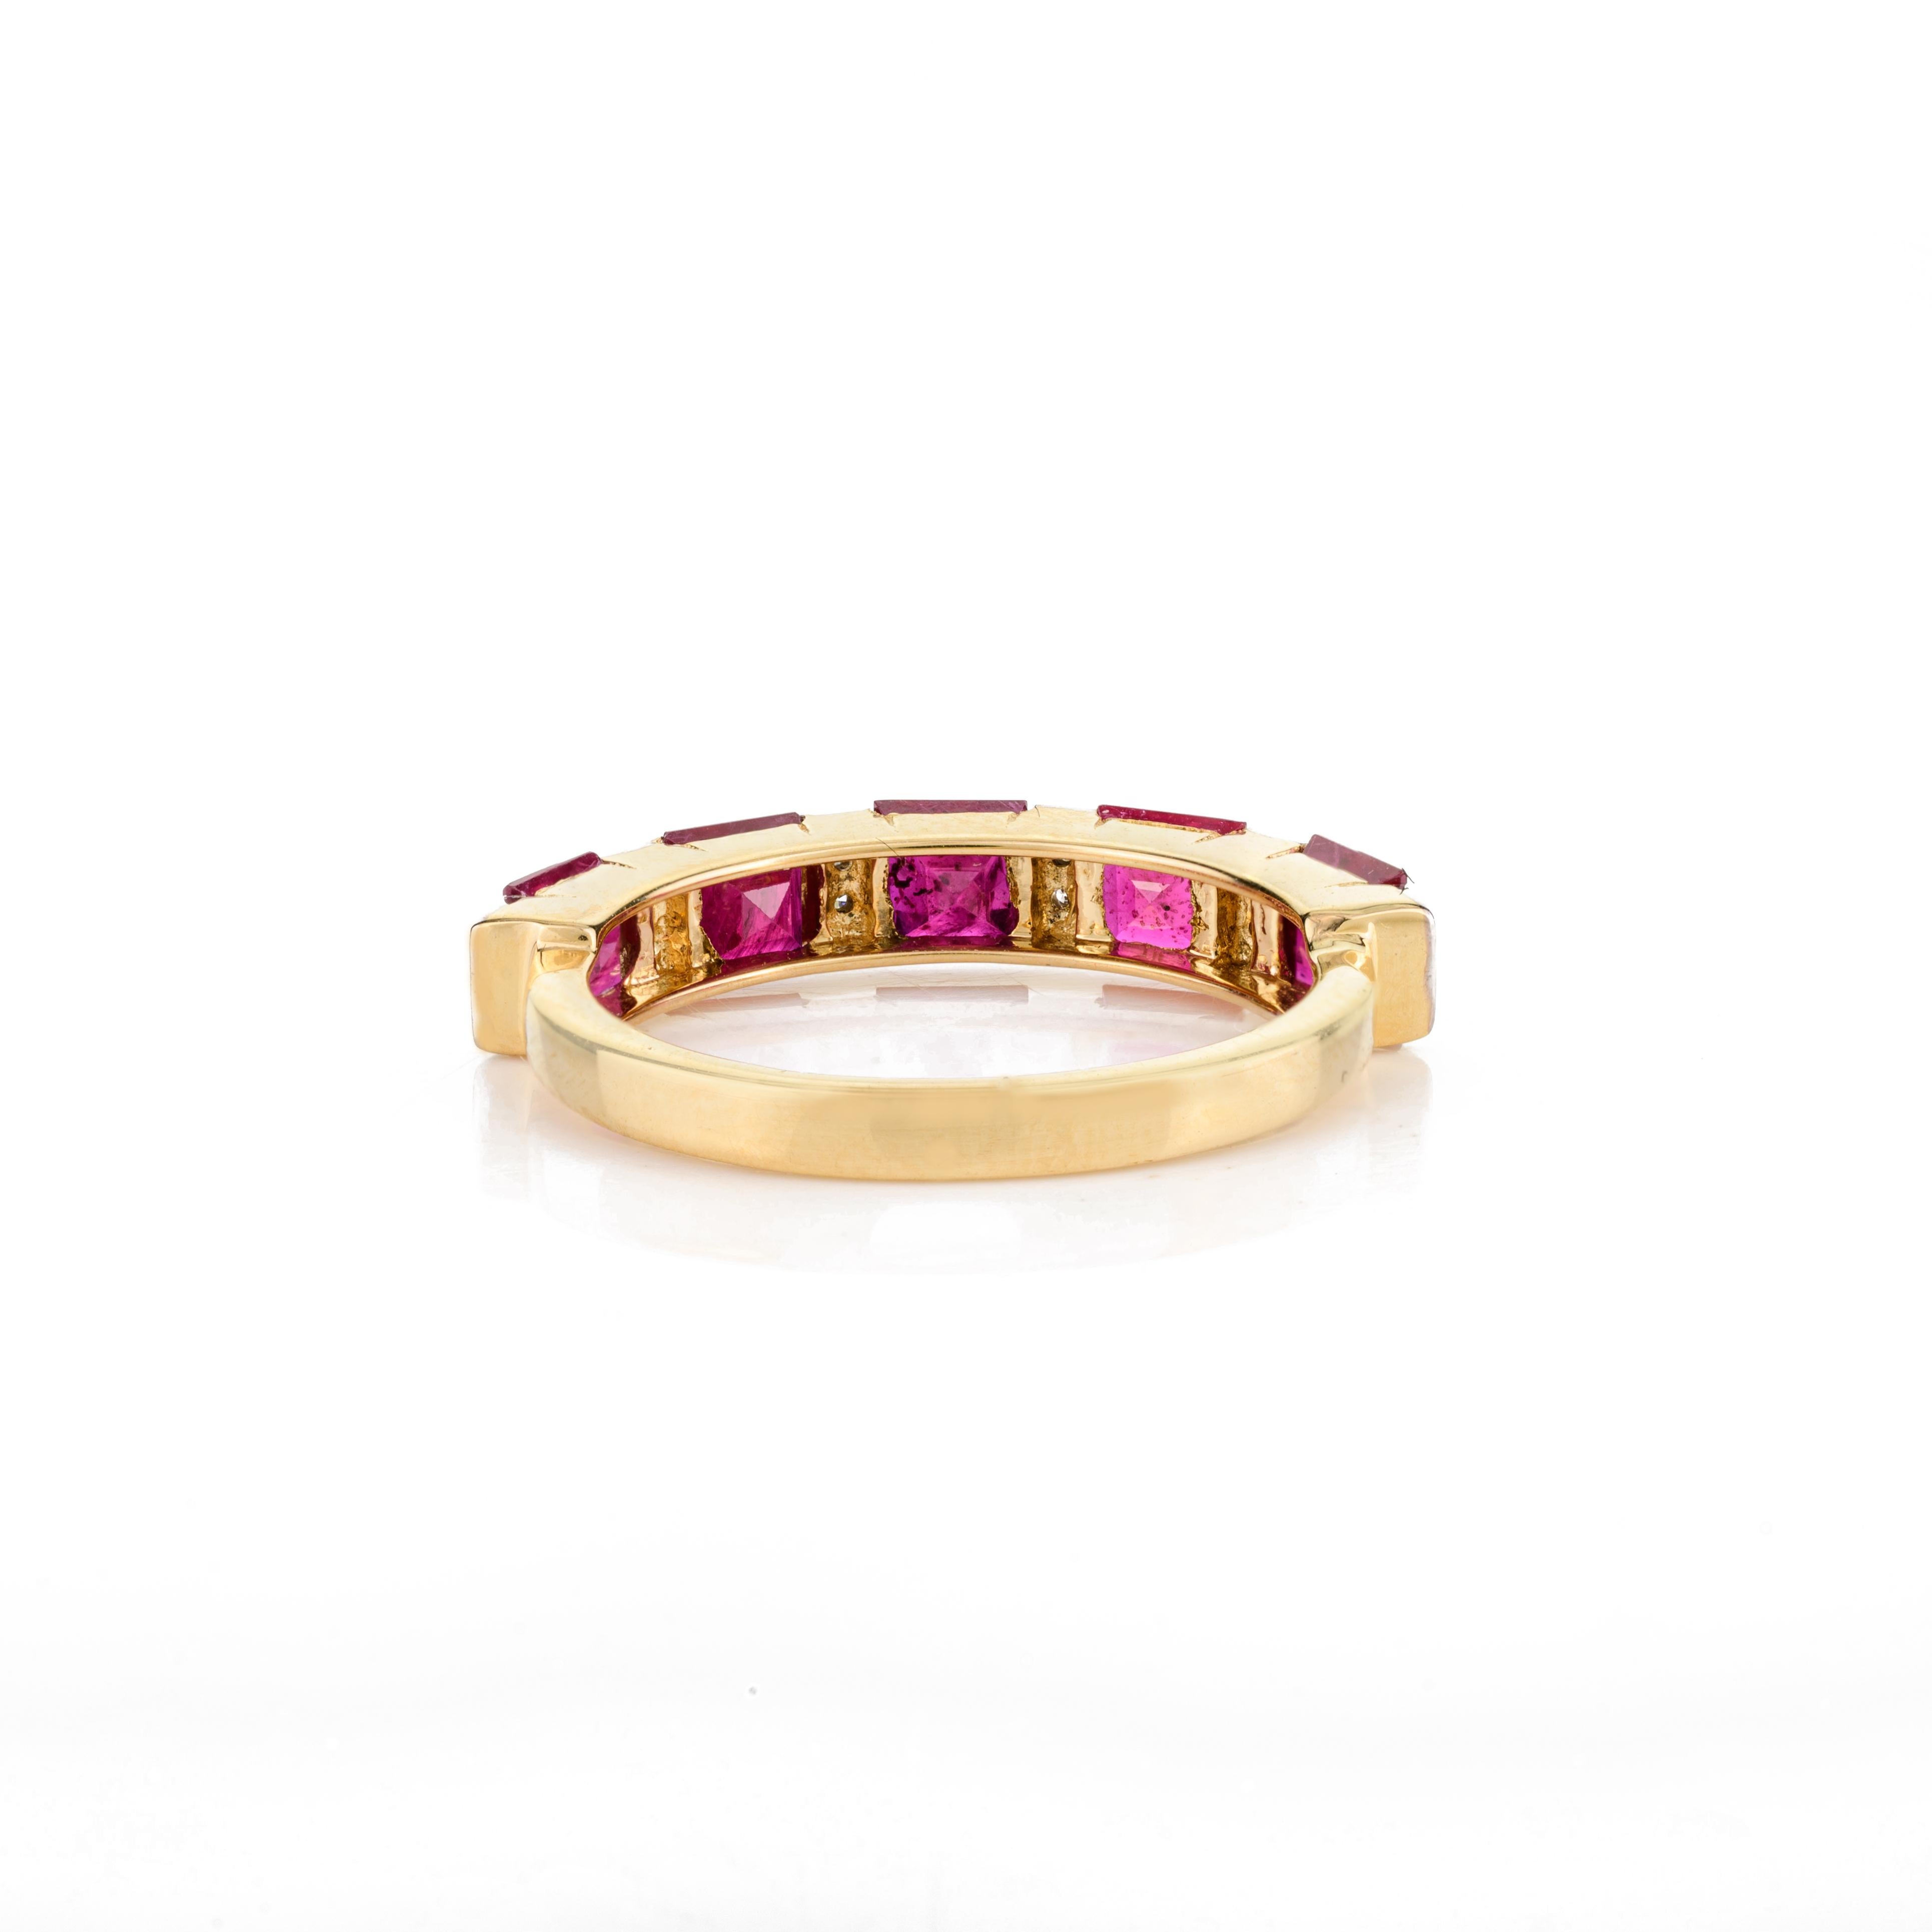 For Sale:  2.15ct Deep Red Ruby and Diamond Engagement Band Ring in 18k Solid Yellow Gold 9